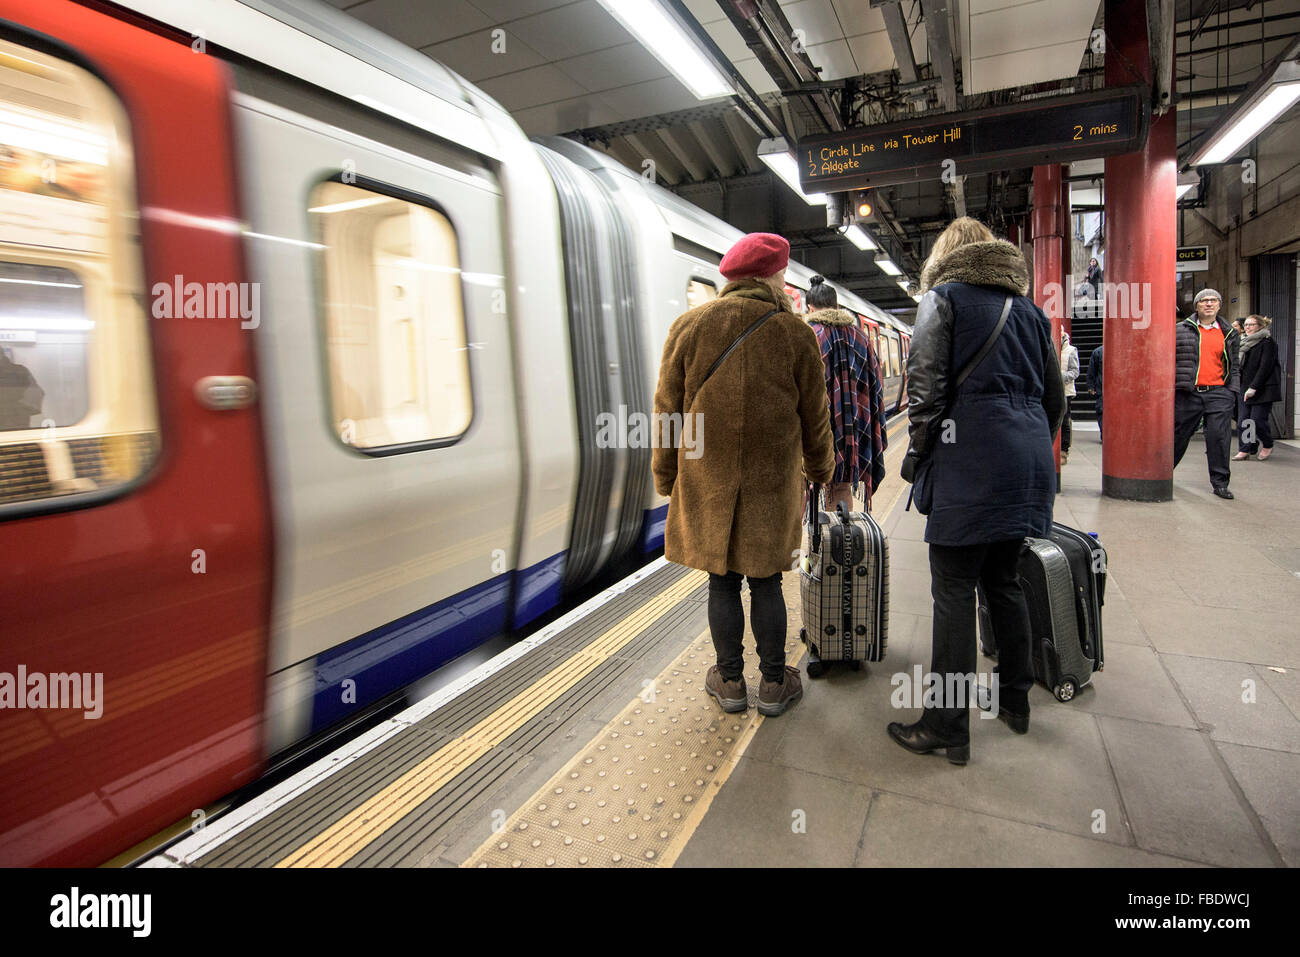 A tube train arrives as passengers stand on the platform of a tube station in London. Stock Photo